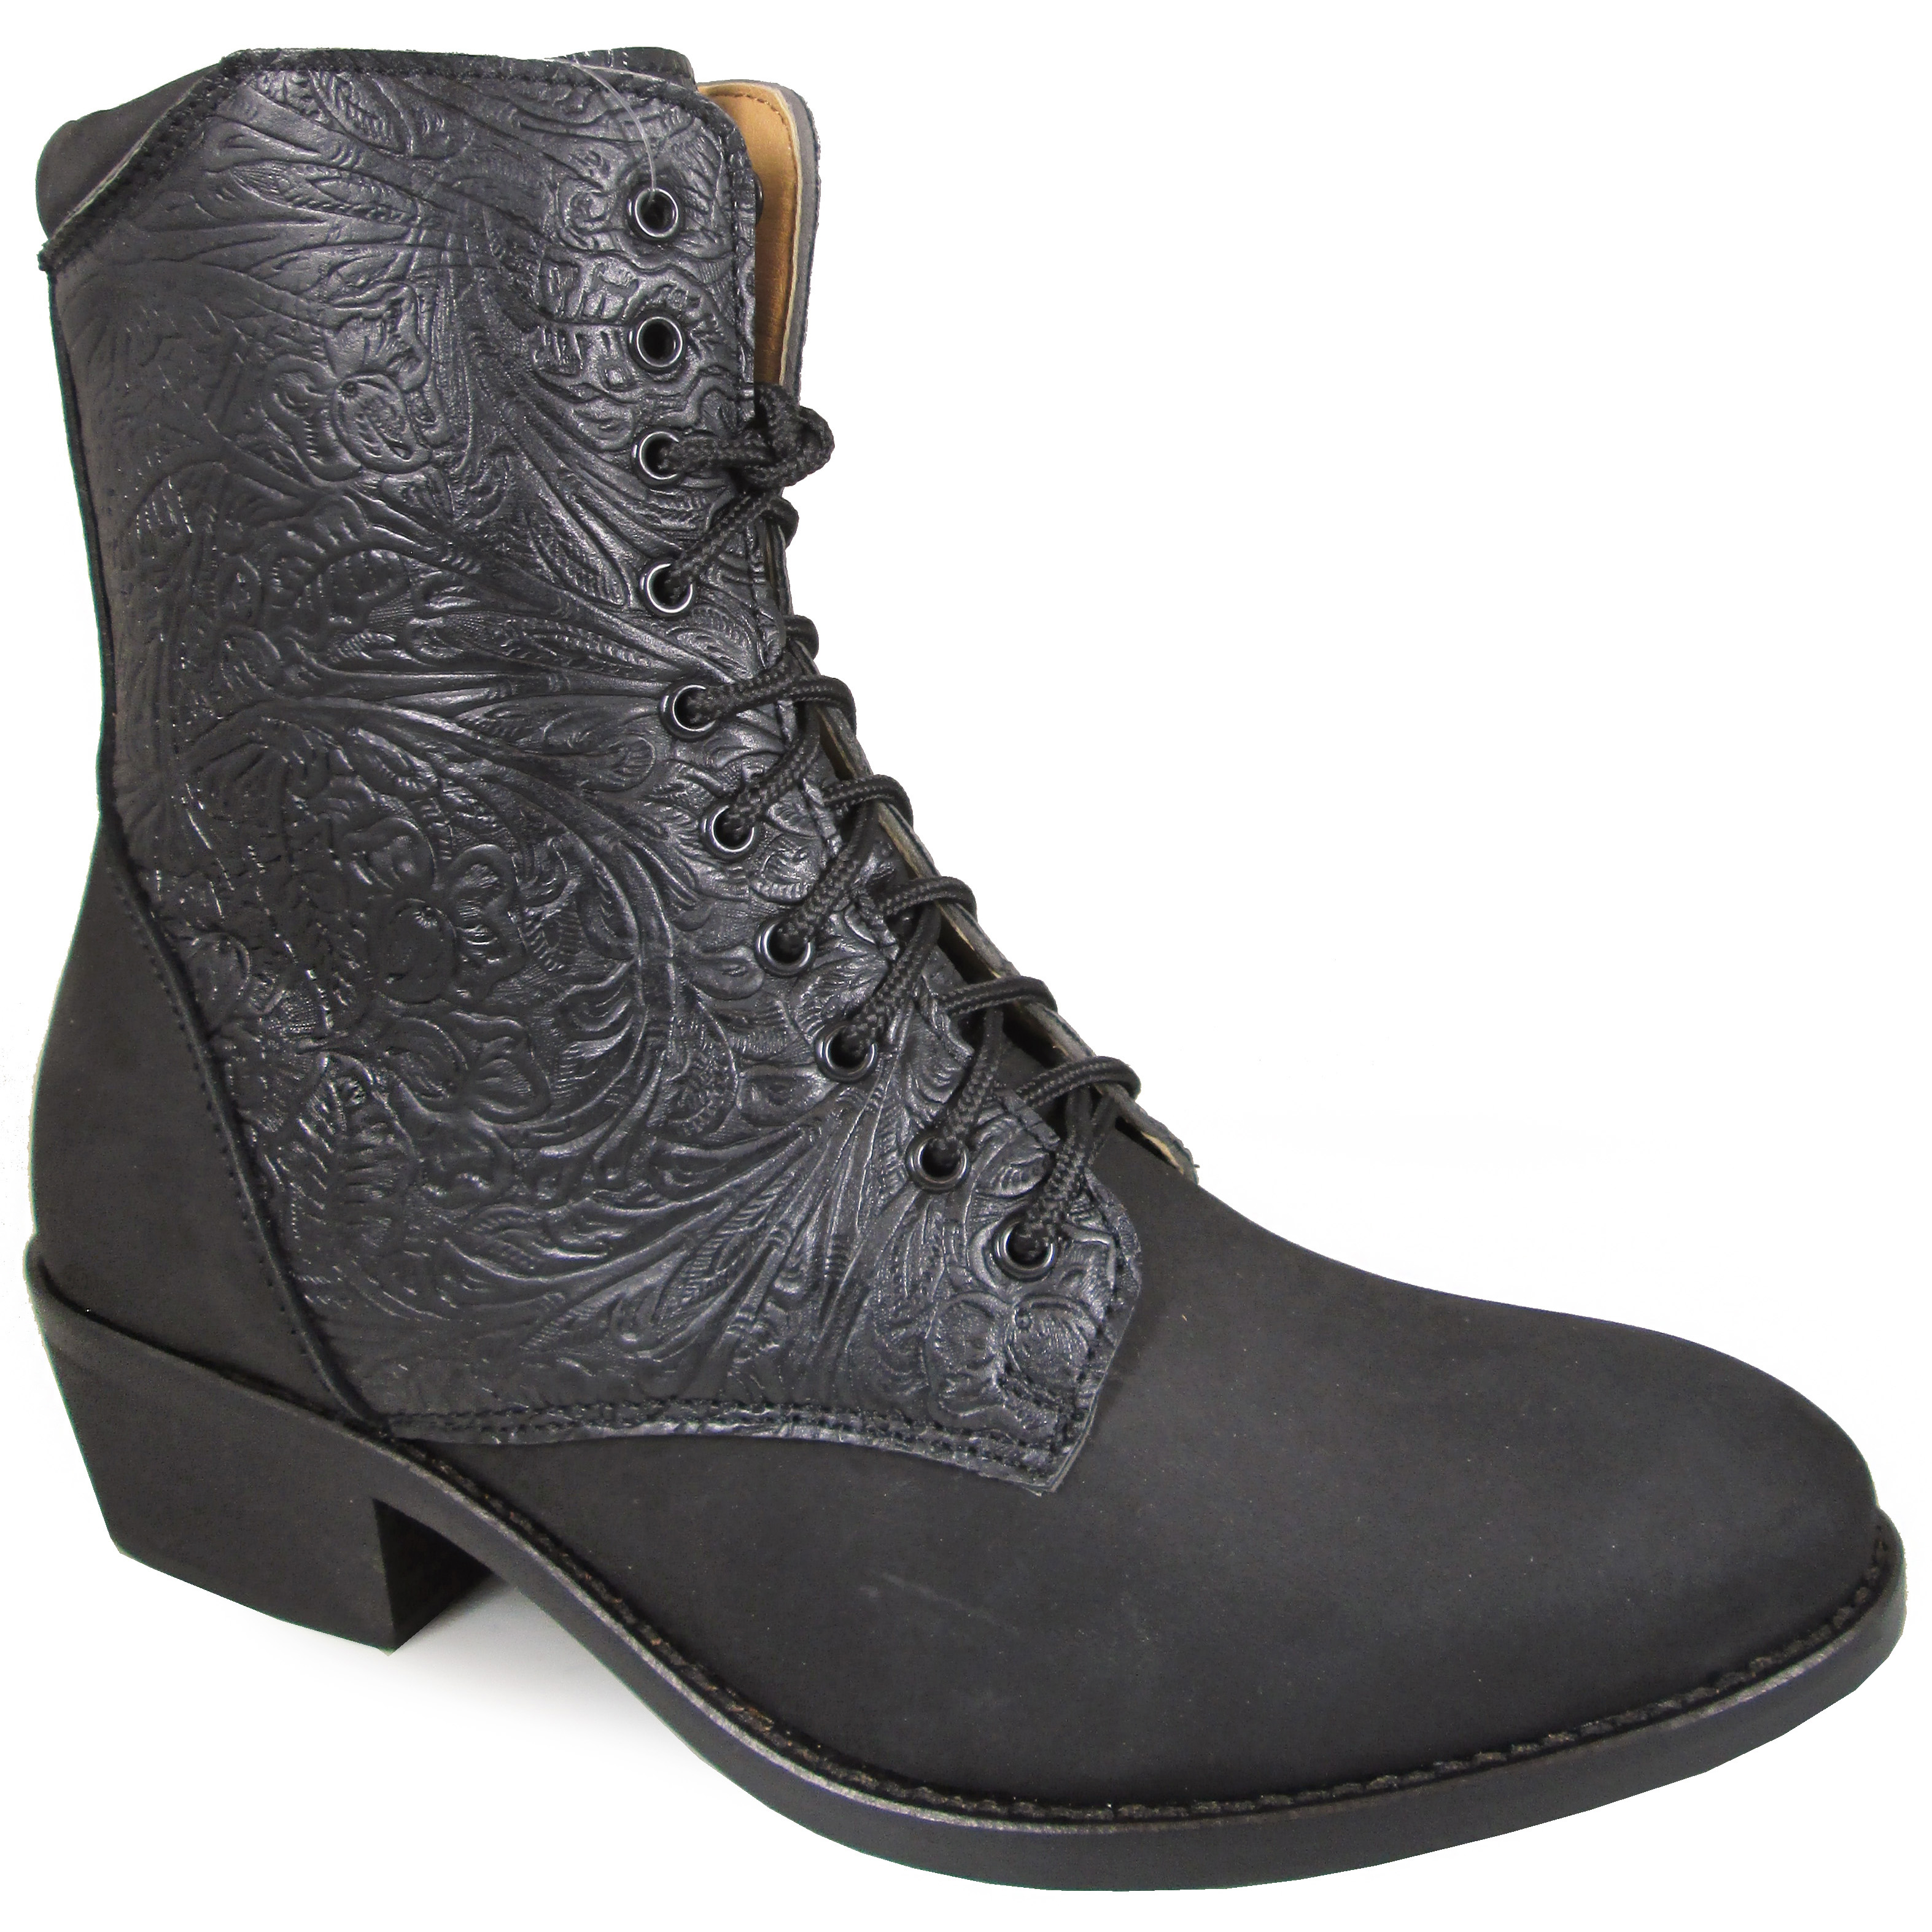 Smoky Mountain Boots Women's Lacer 6" Black Laced Cowboy Boot